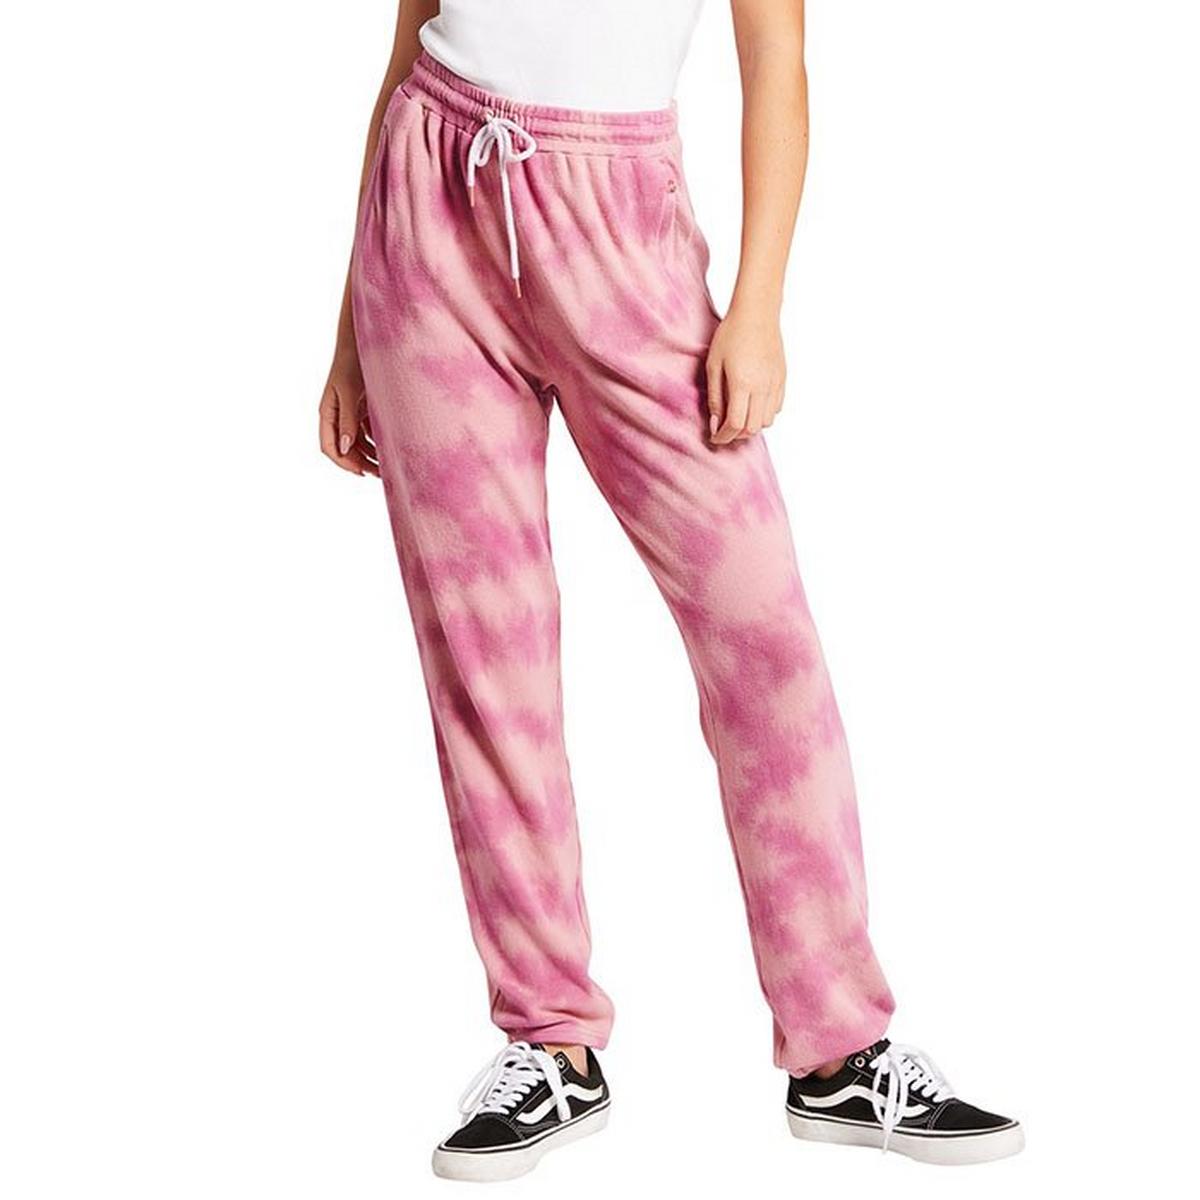 Women's Lived In Lounge Fleece Pant